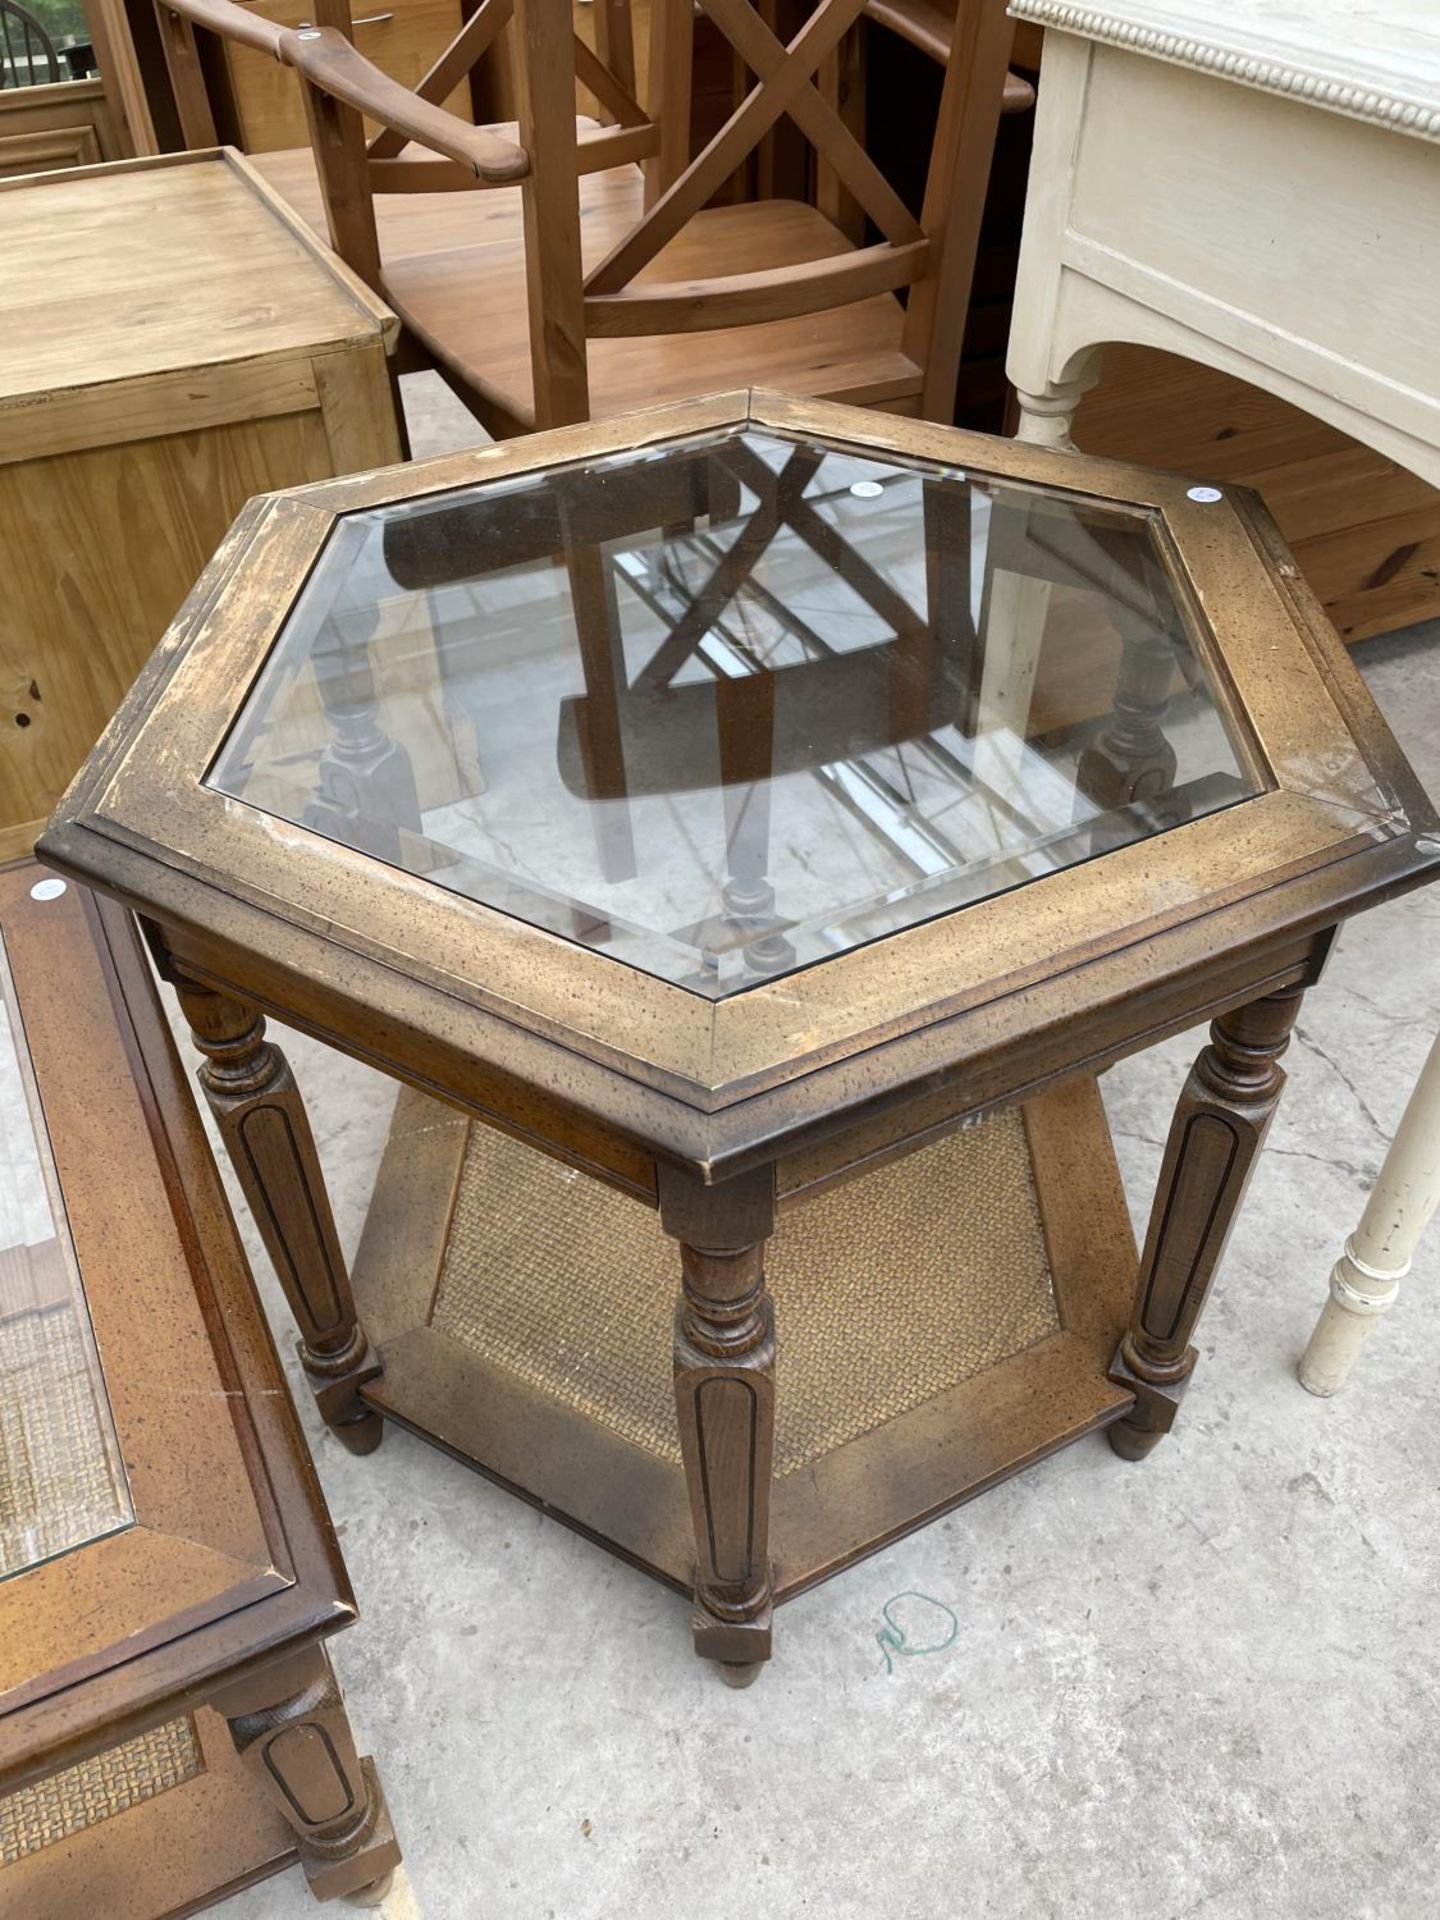 TWO GLASS TOPPED COFFEE TABLES, BOTH WITH CANE UNDERTIERS - Image 4 of 6